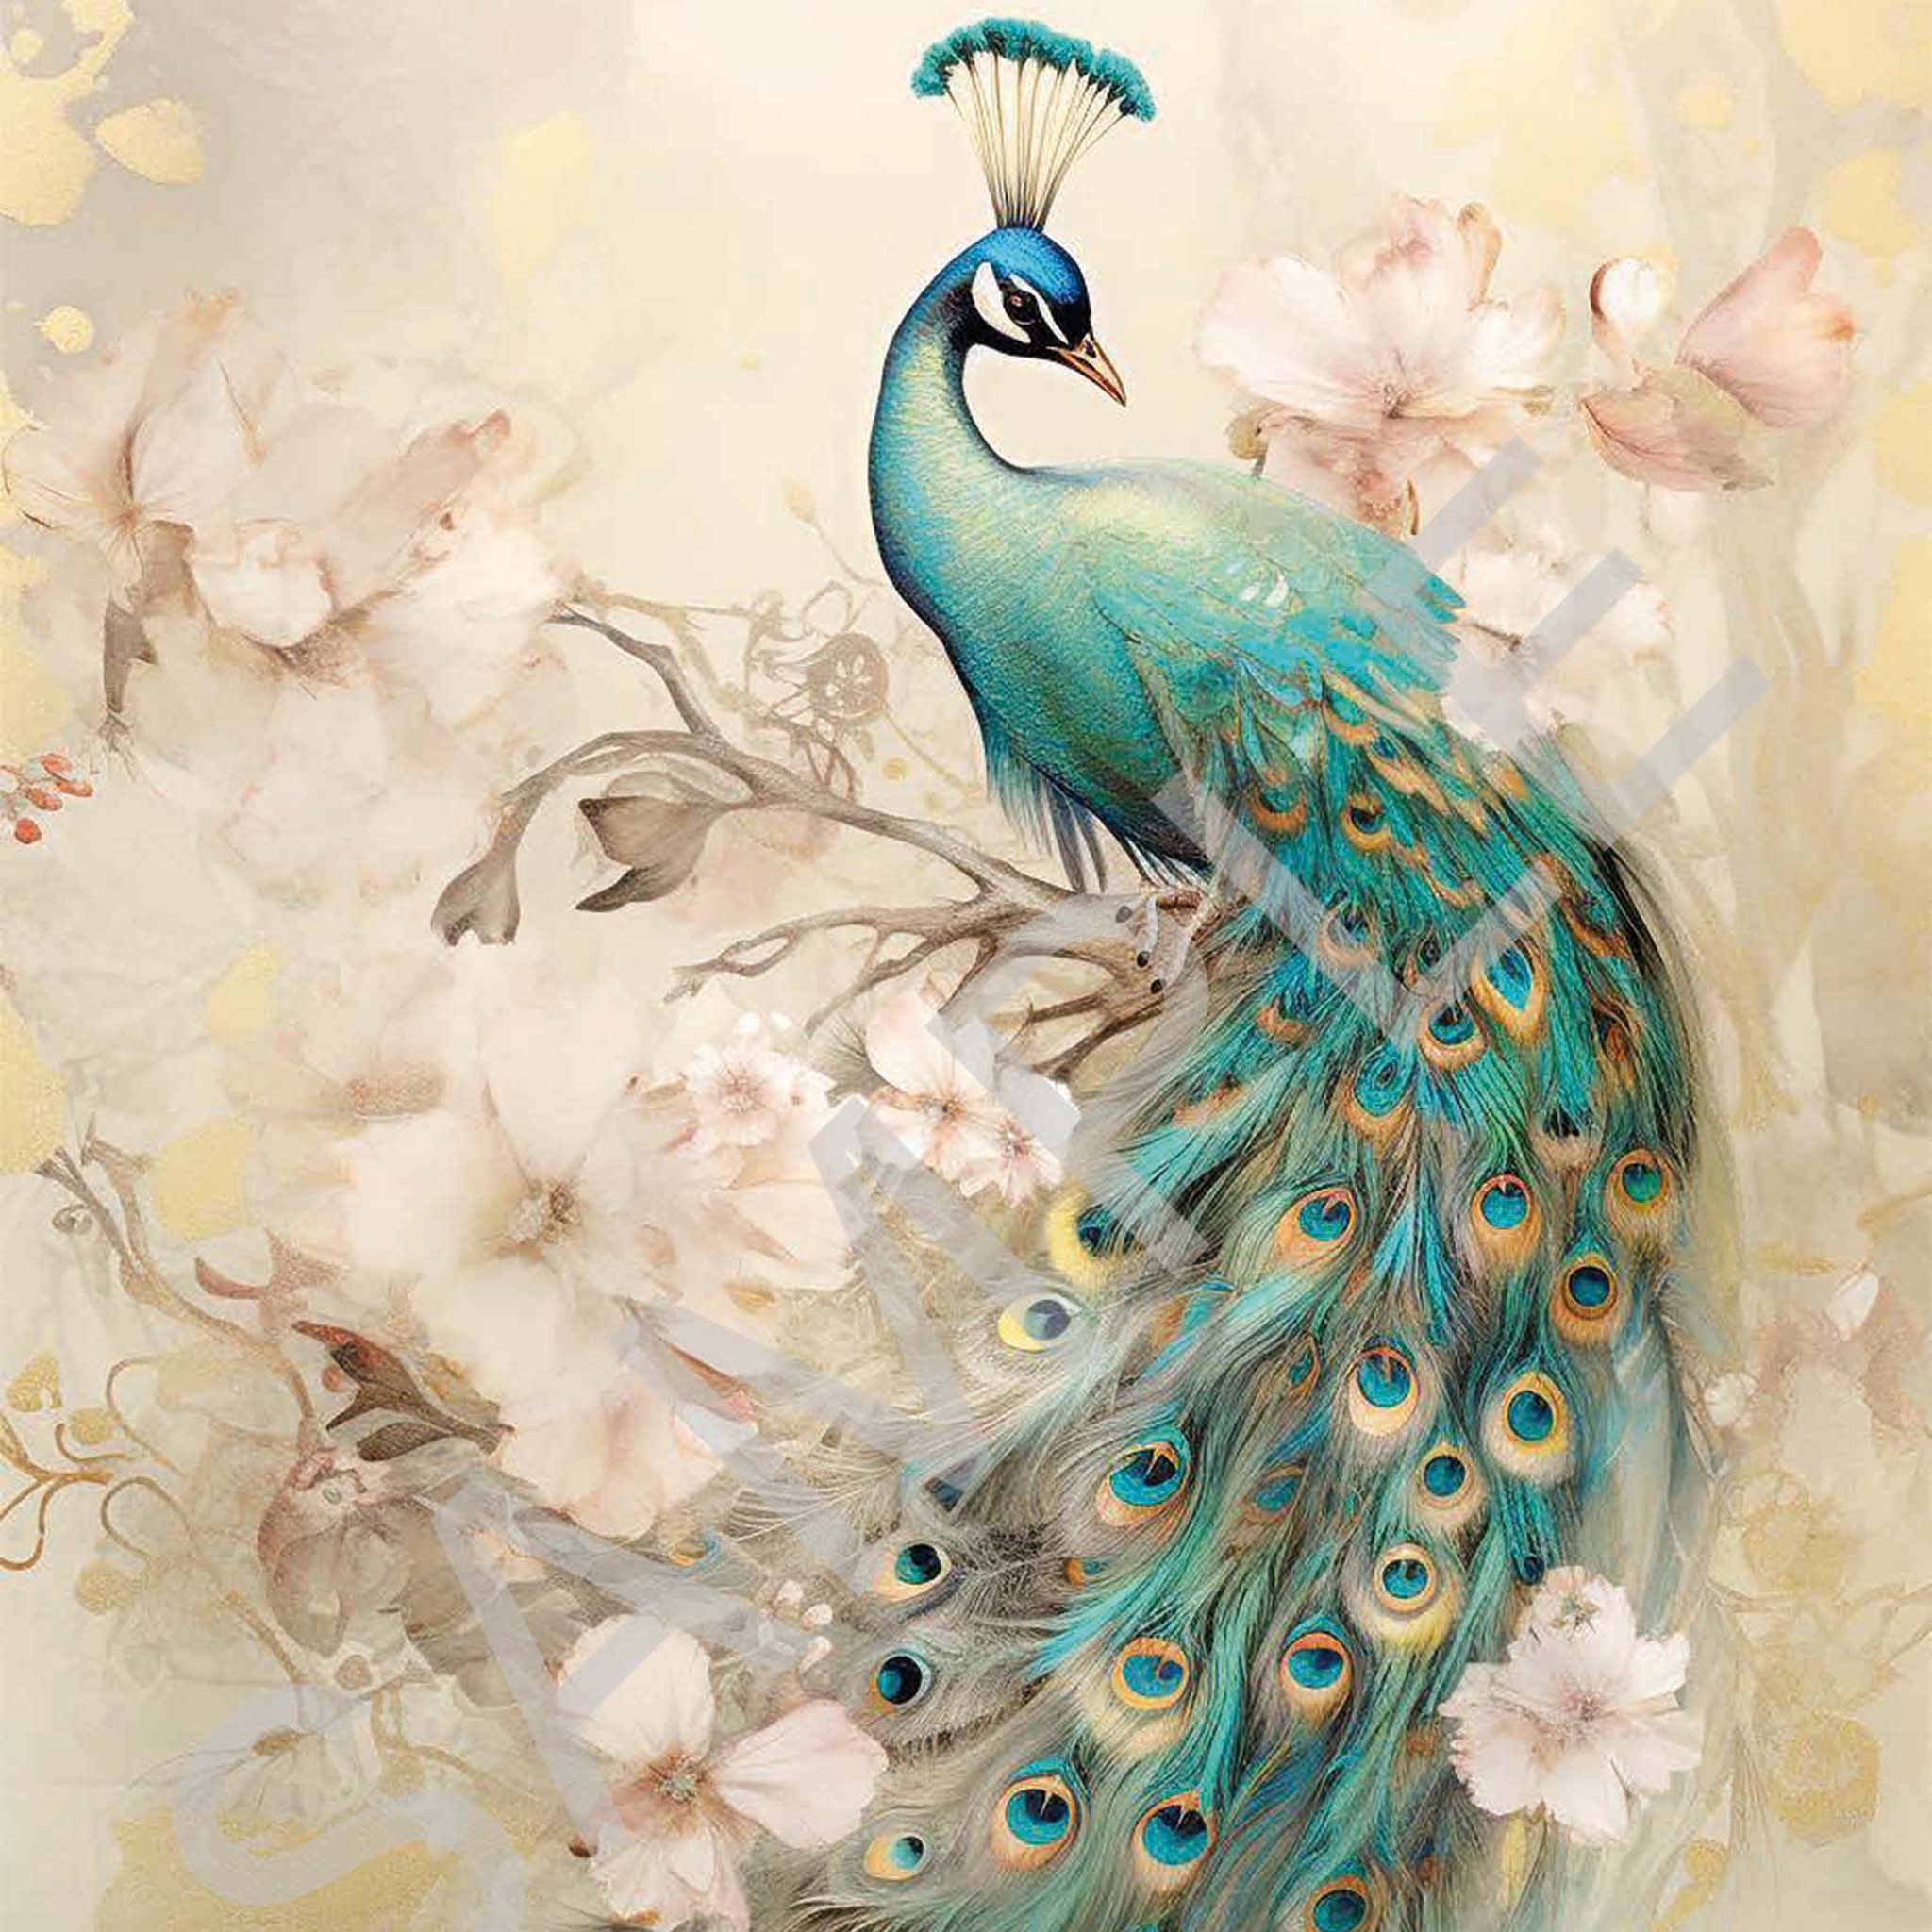 Close-up of an A4 rice paper design featuring a vibrant peacock amid a pastel background and blooming flowers.